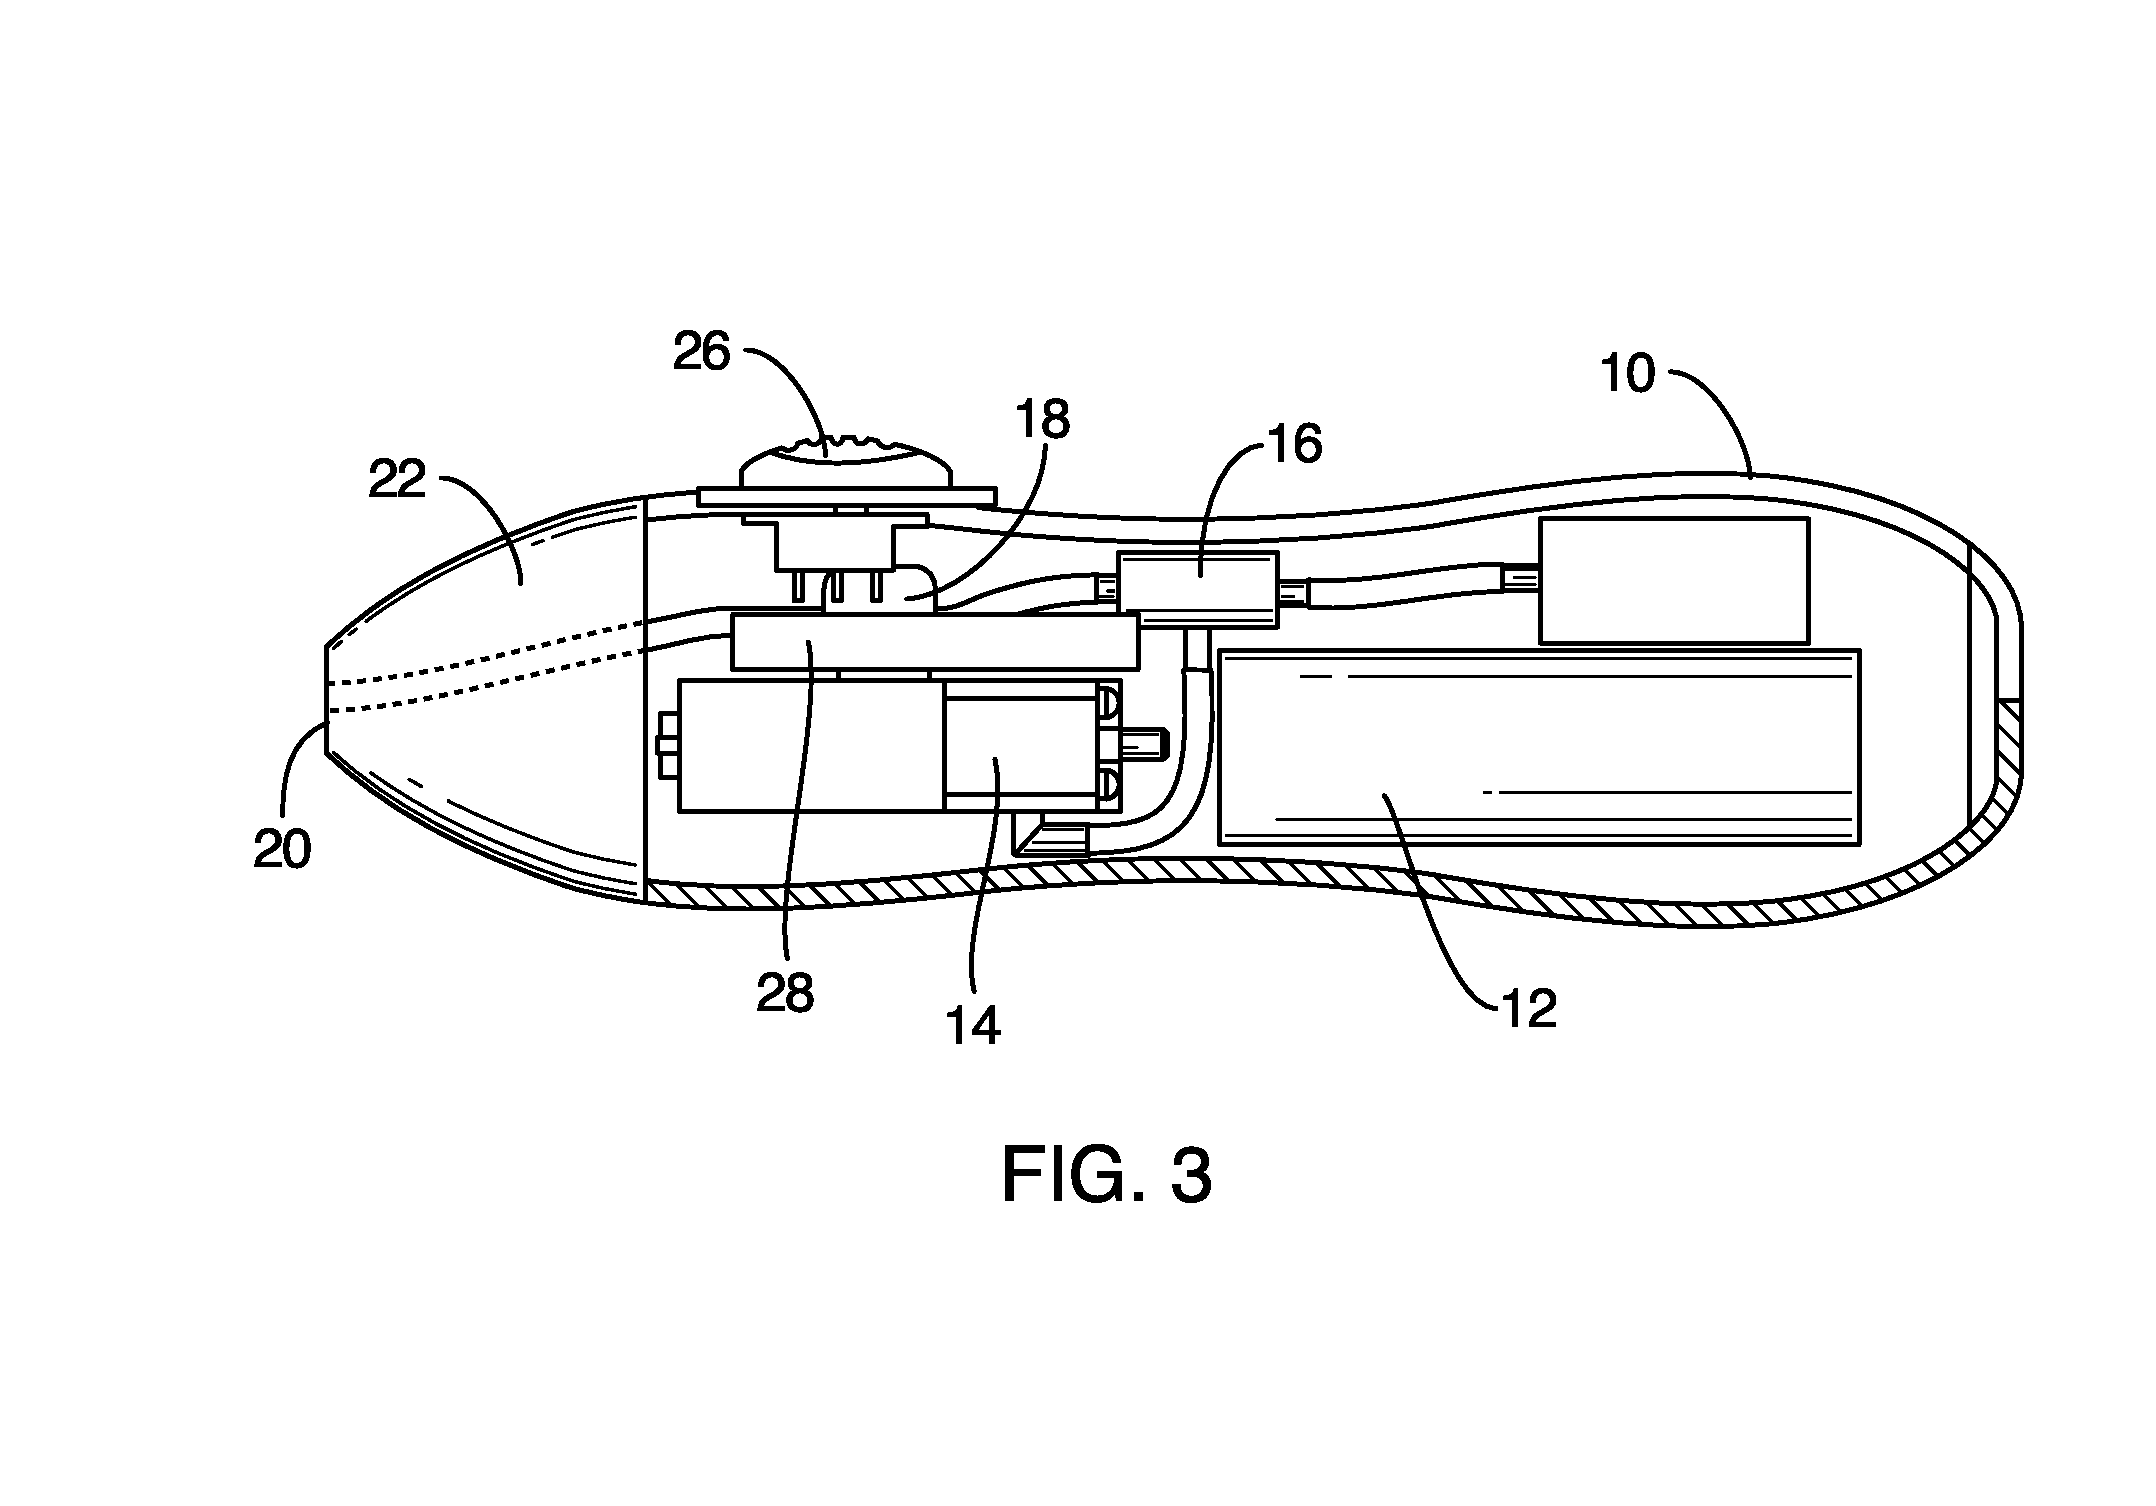 Plumping Device and Method